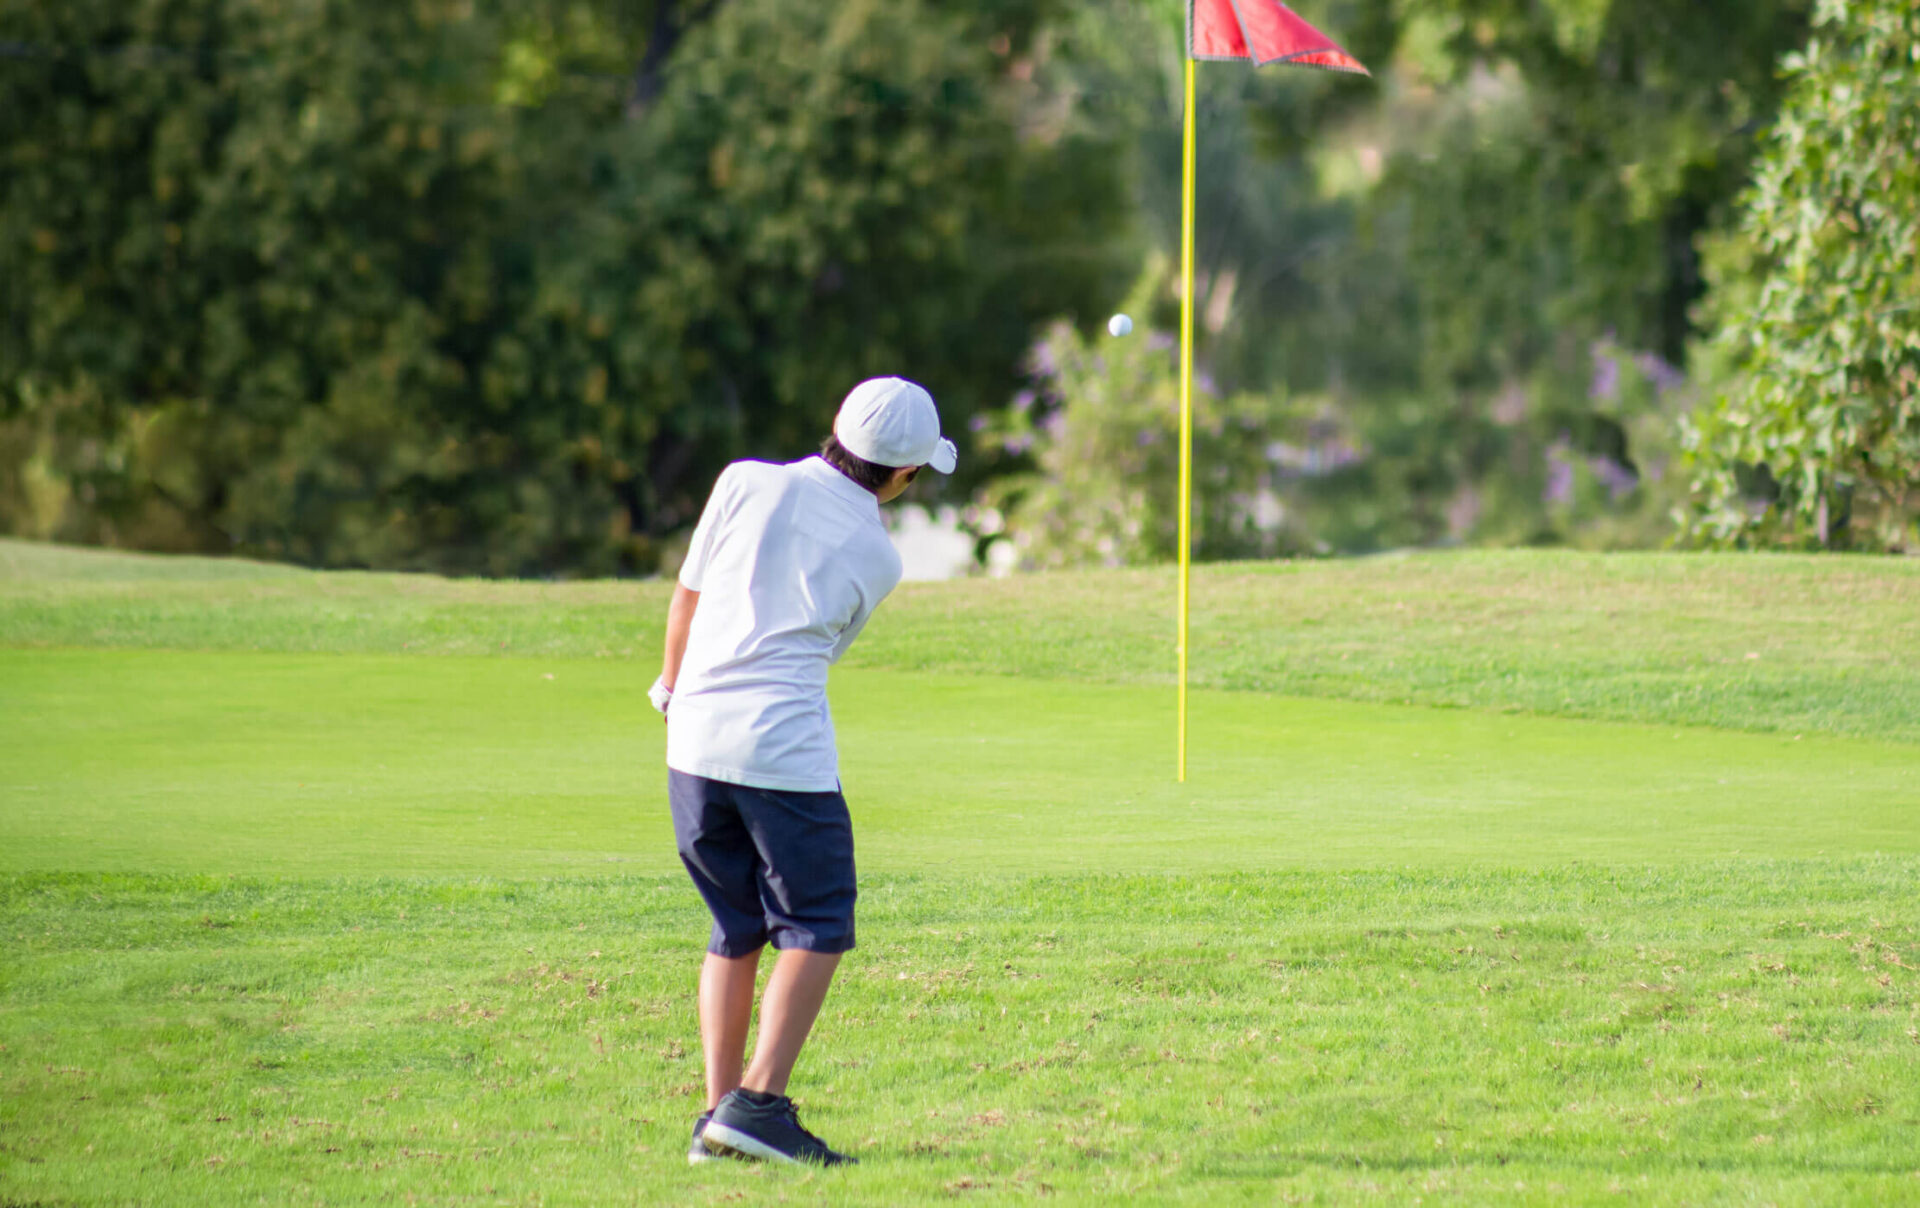 A kid playing golf